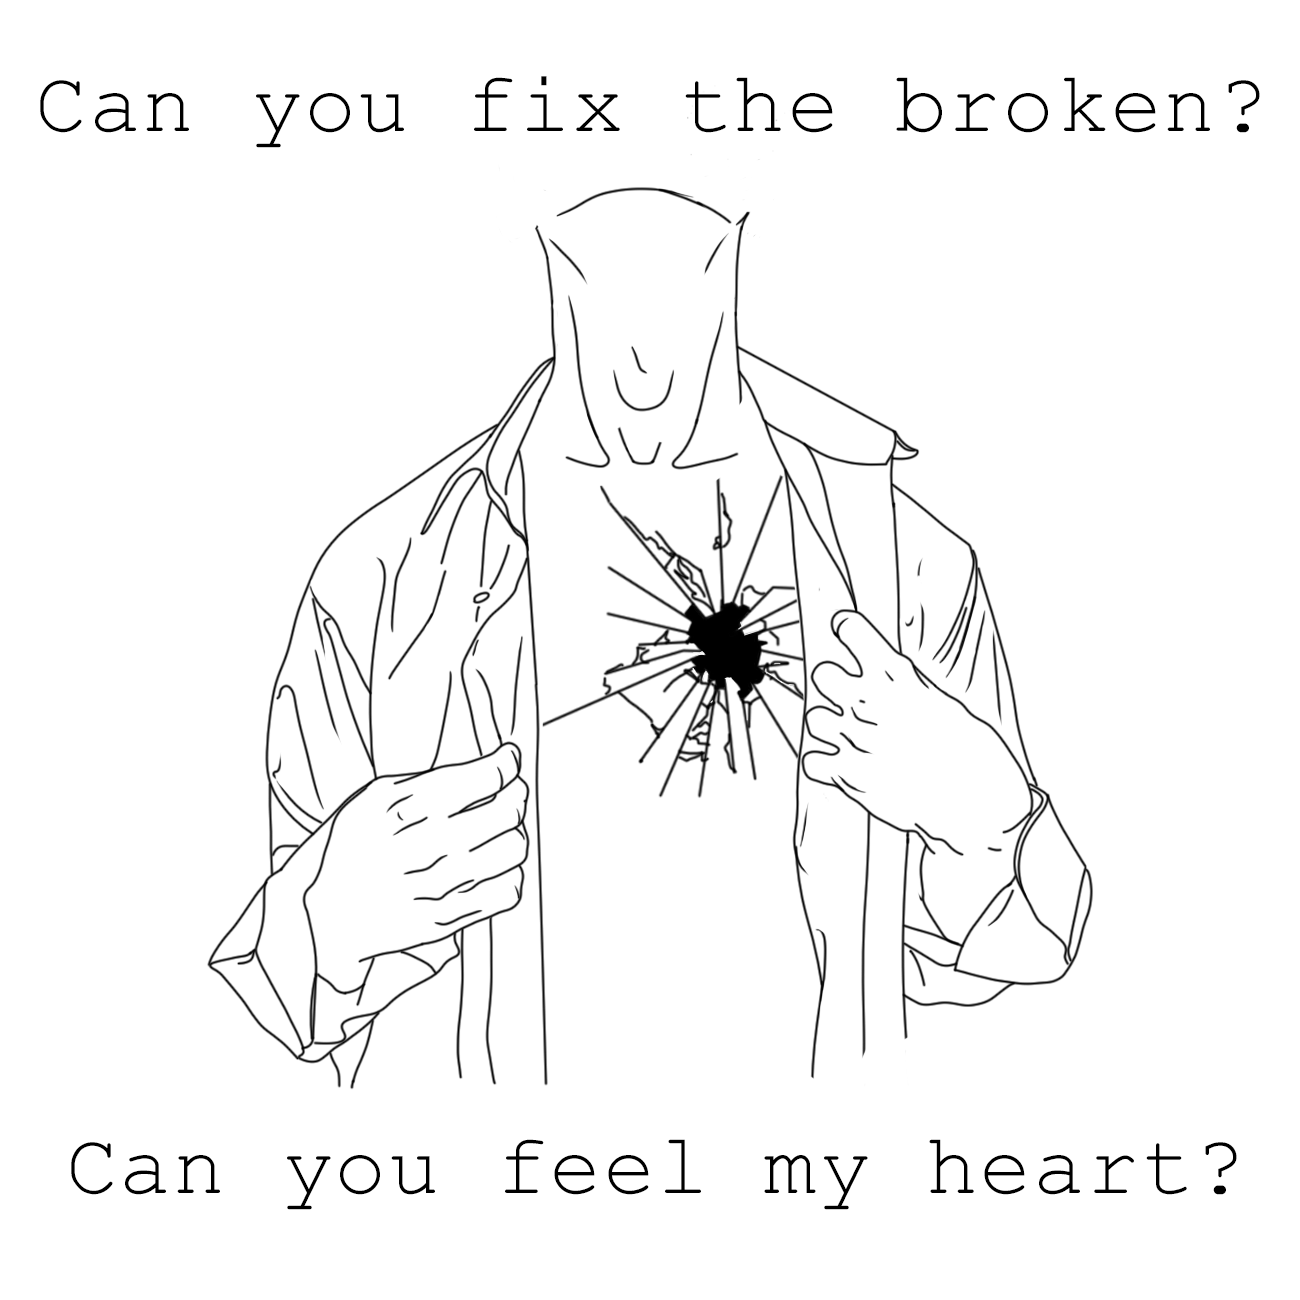 Can you feel life. Can you Fix the broken can you feel my Heart. Feel my Heart. Can feel my Heart. You feel my Heart.